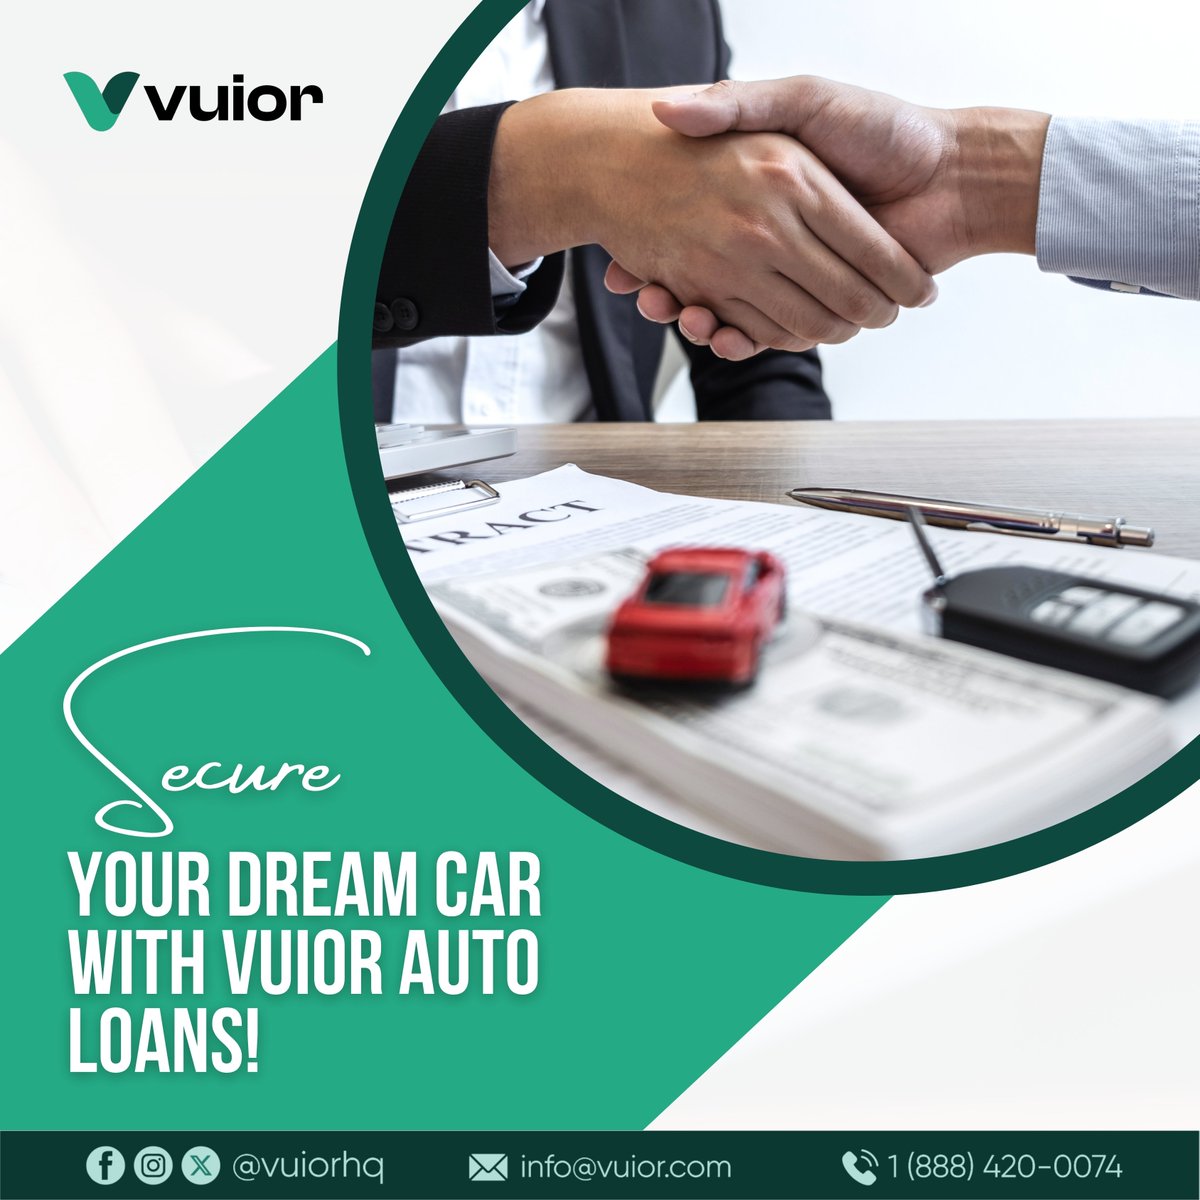 Ready to hit the road in your dream car? 🚗 At Vuior, we offer flexible auto loans with competitive rates, so you can drive away with confidence.
---
🌐 vuior.Com/careers/
.
.
.
.
#autoloan #driveyourdream #vuiorloans #financialfreedom #applynow
#dreamcardeals